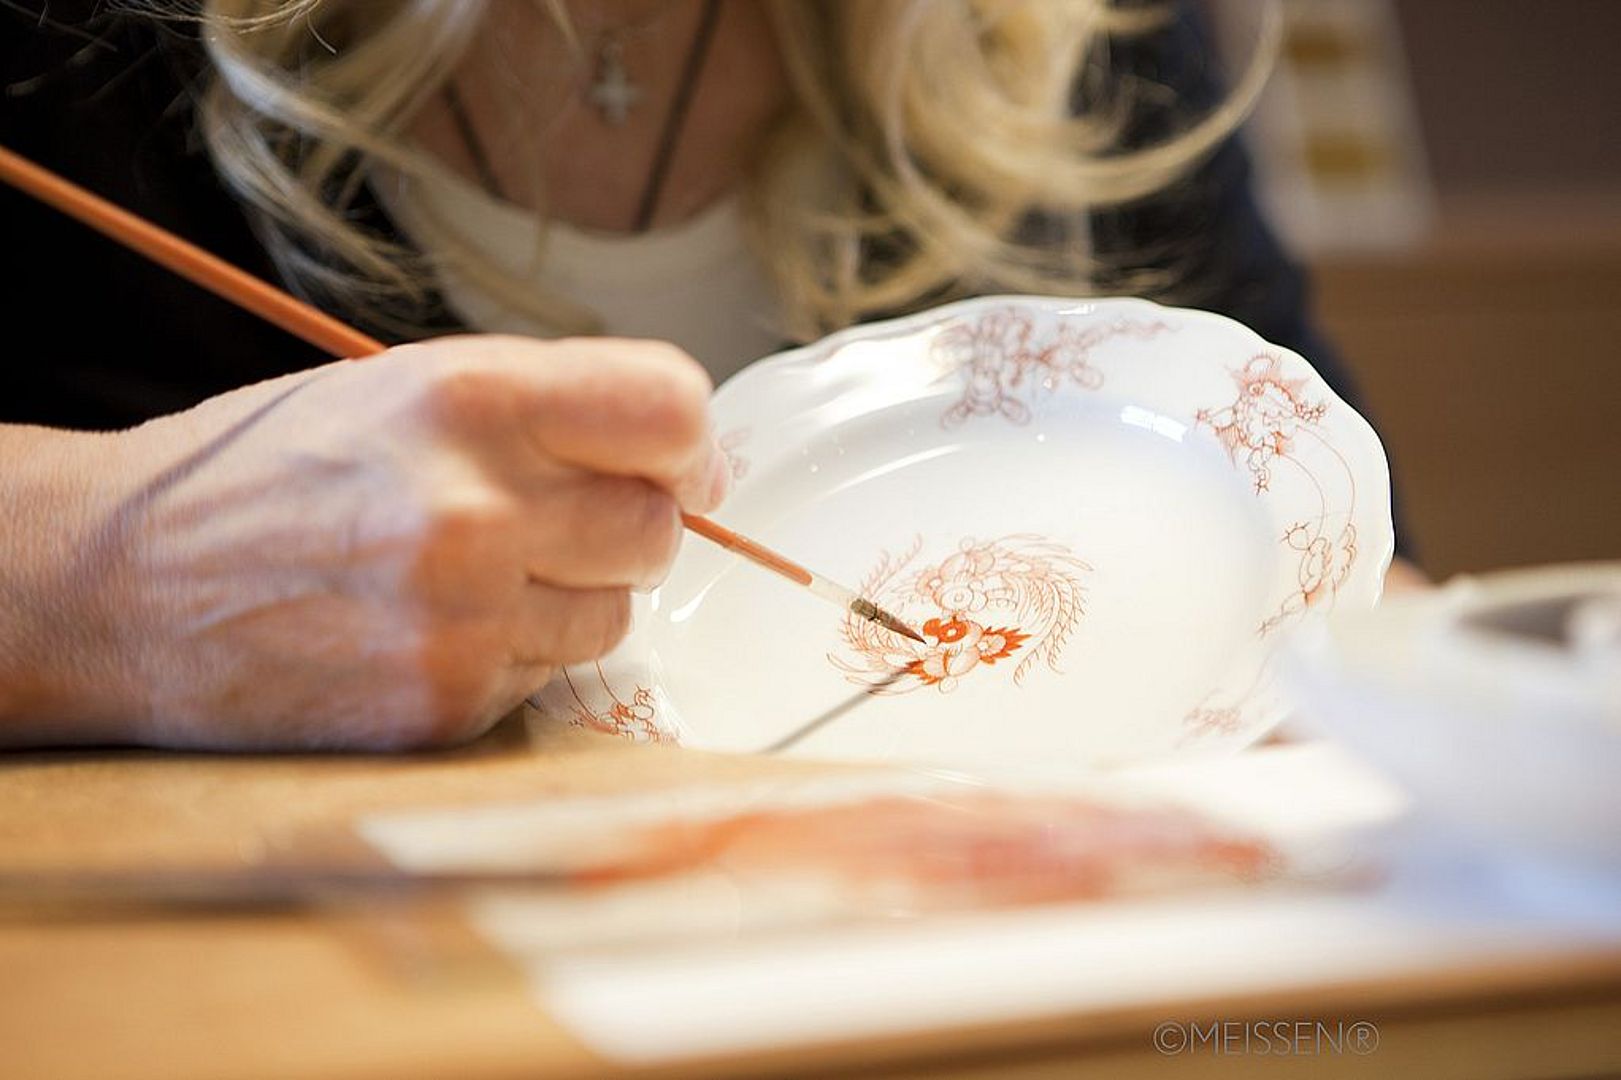 Porcelain painting - Things to Discover - Meissen Porcelain Museum